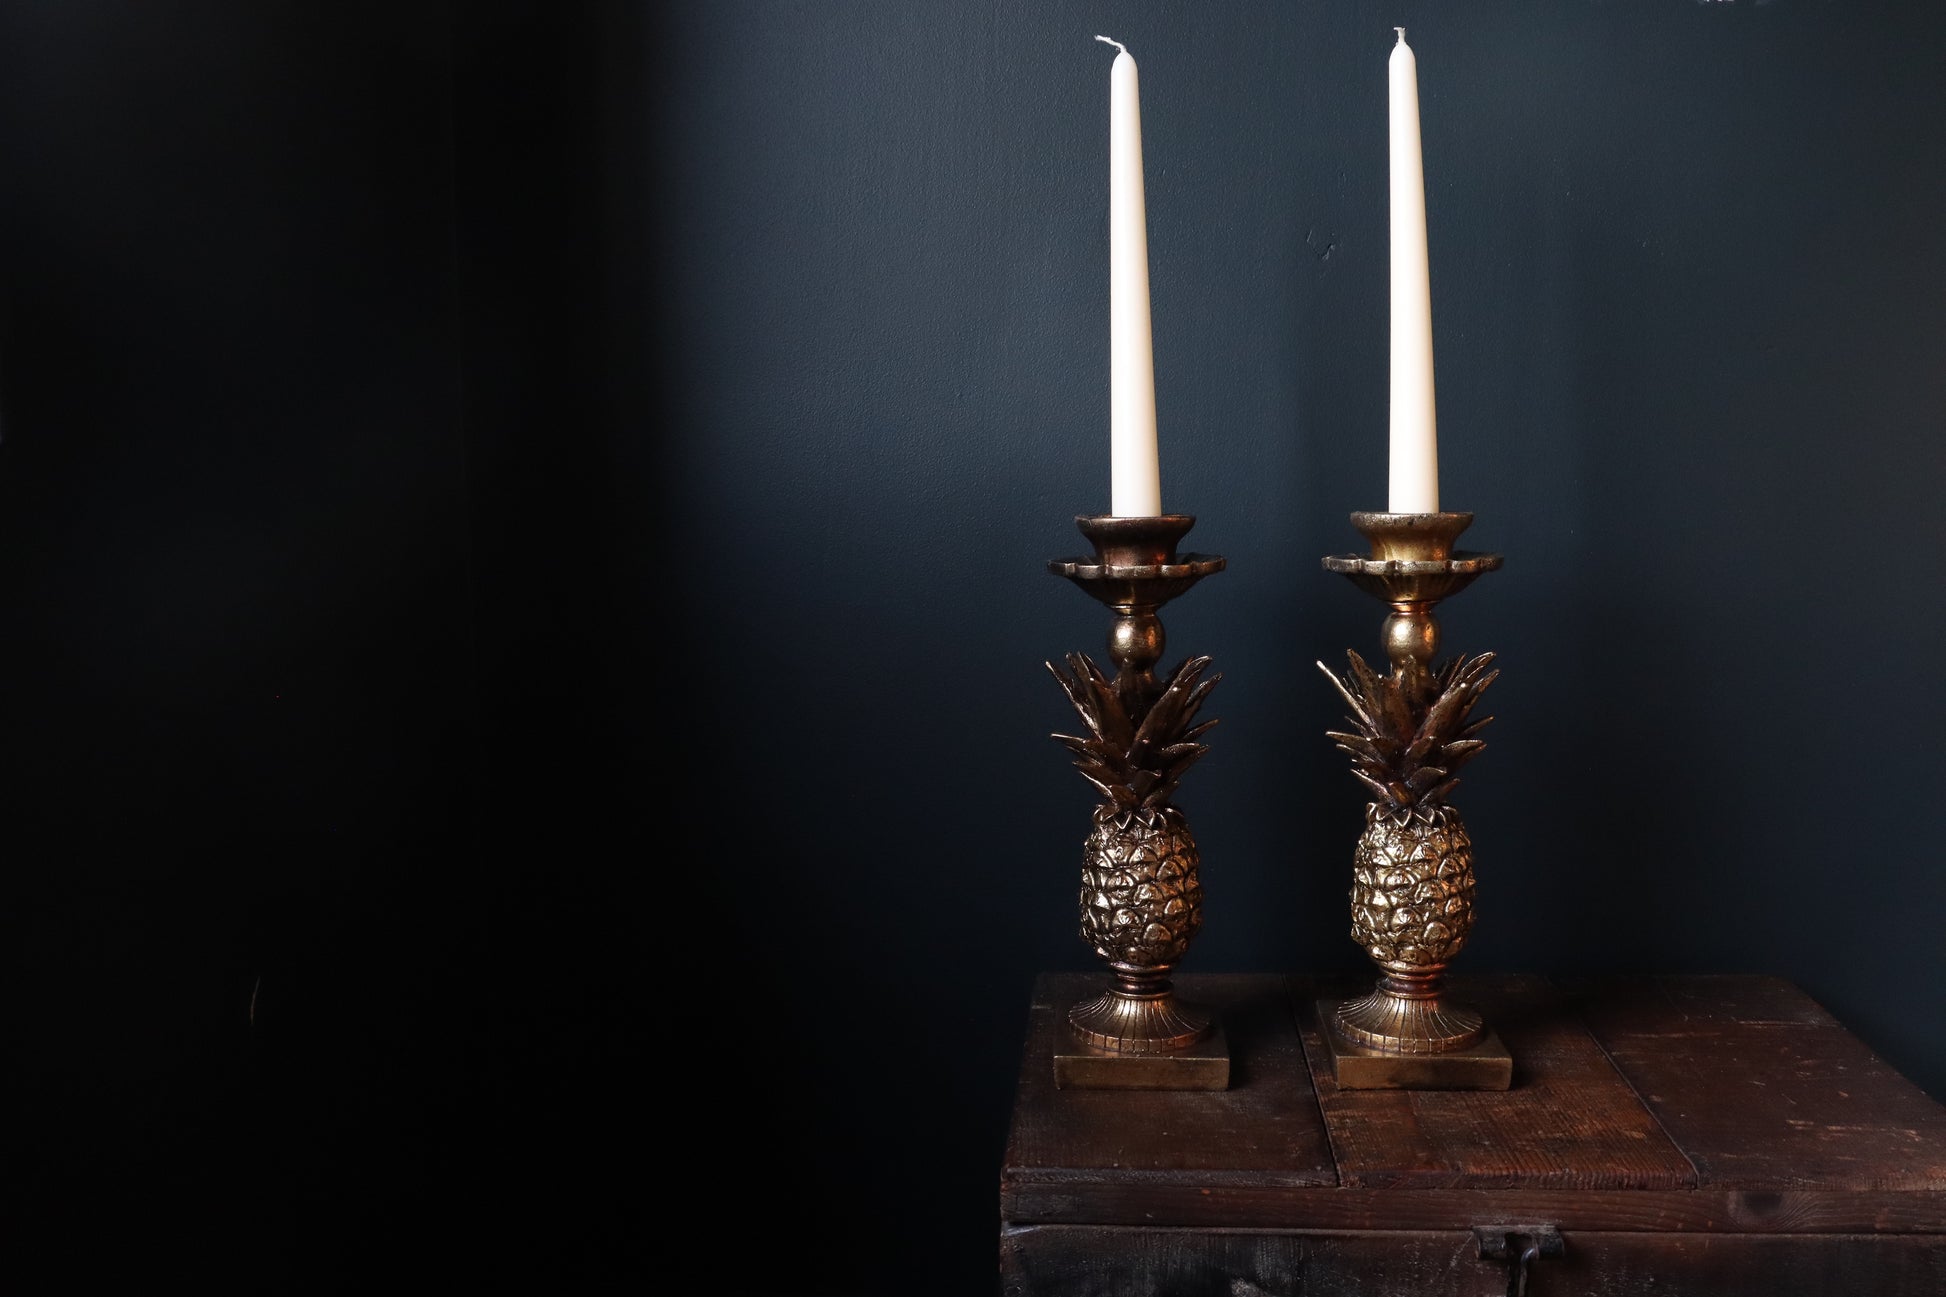 gold pineapple candle holder on a wooden surface with dark background holding 2 dinner candles